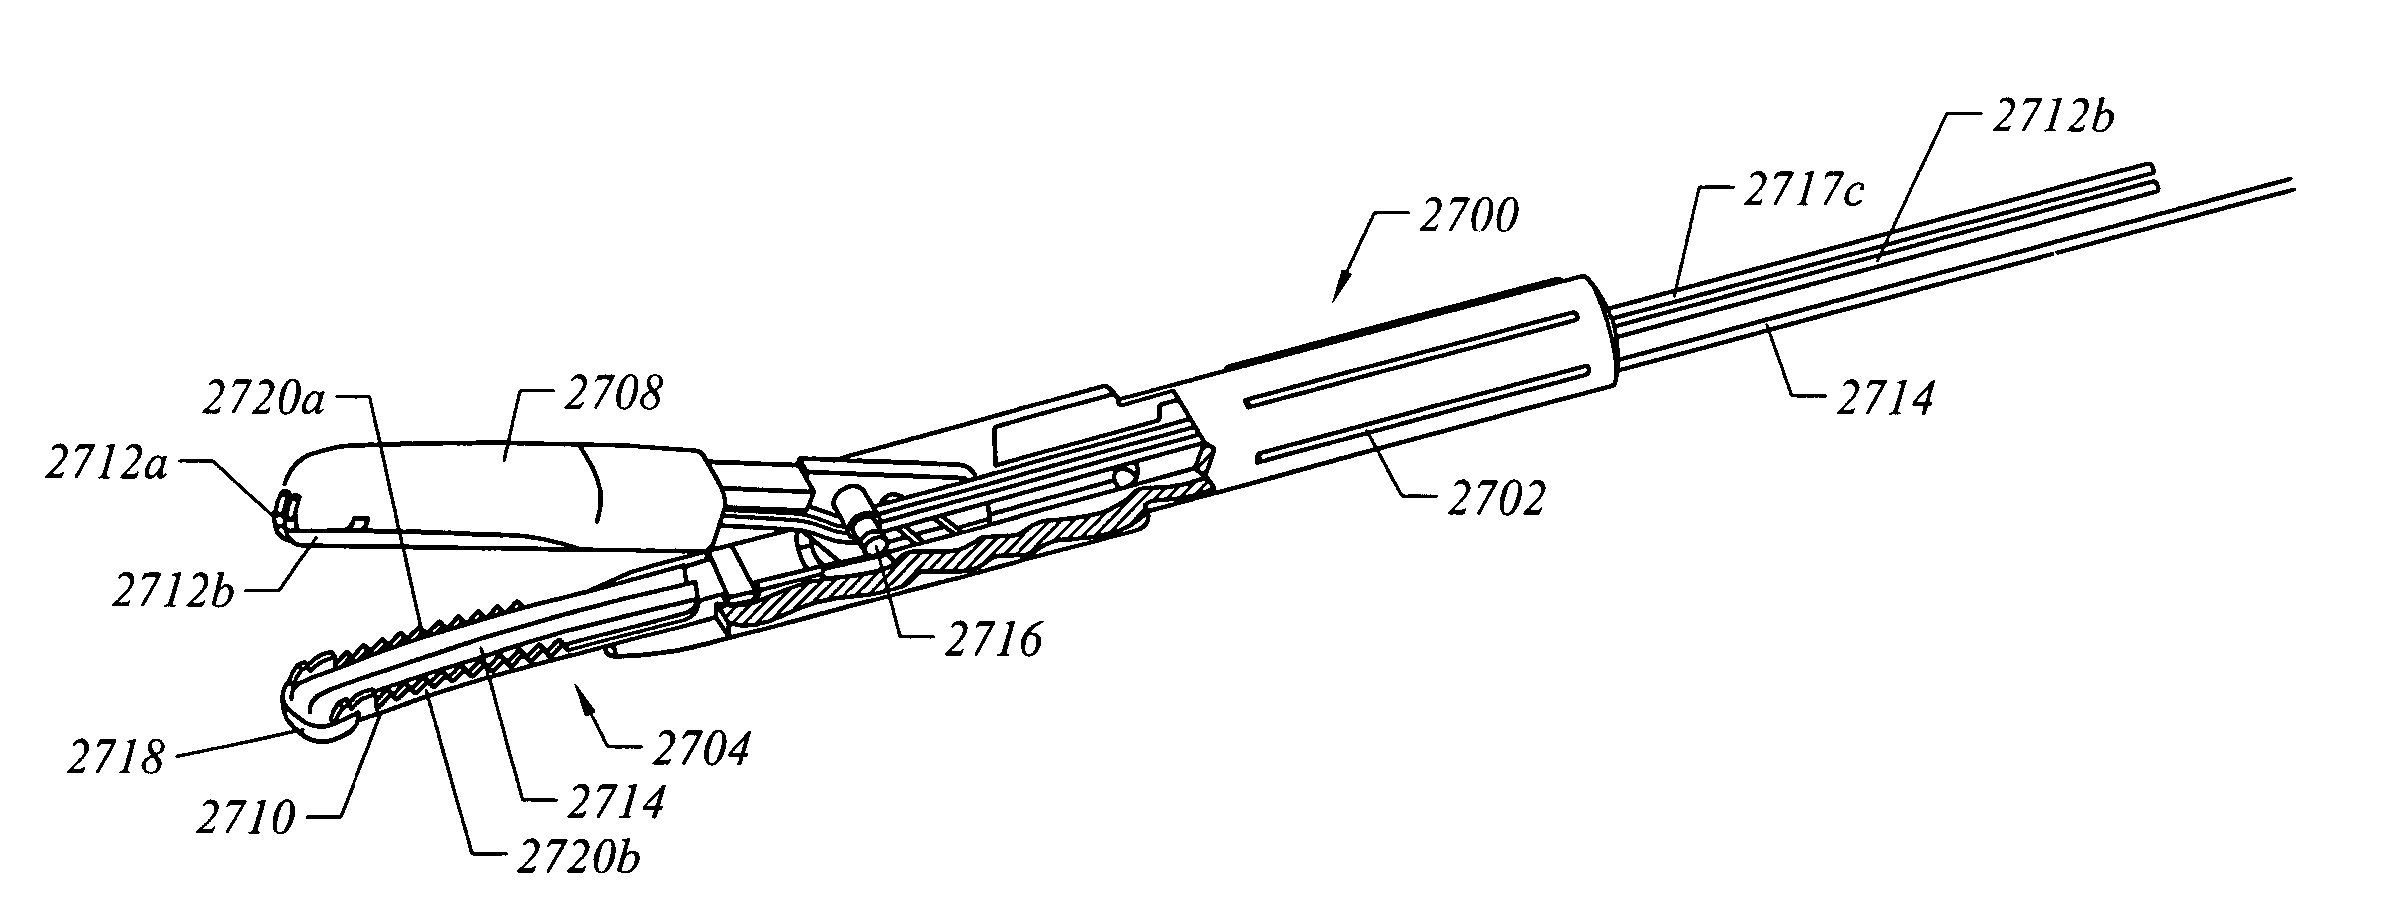 Selectively controlled active electrodes for electrosurgical probe